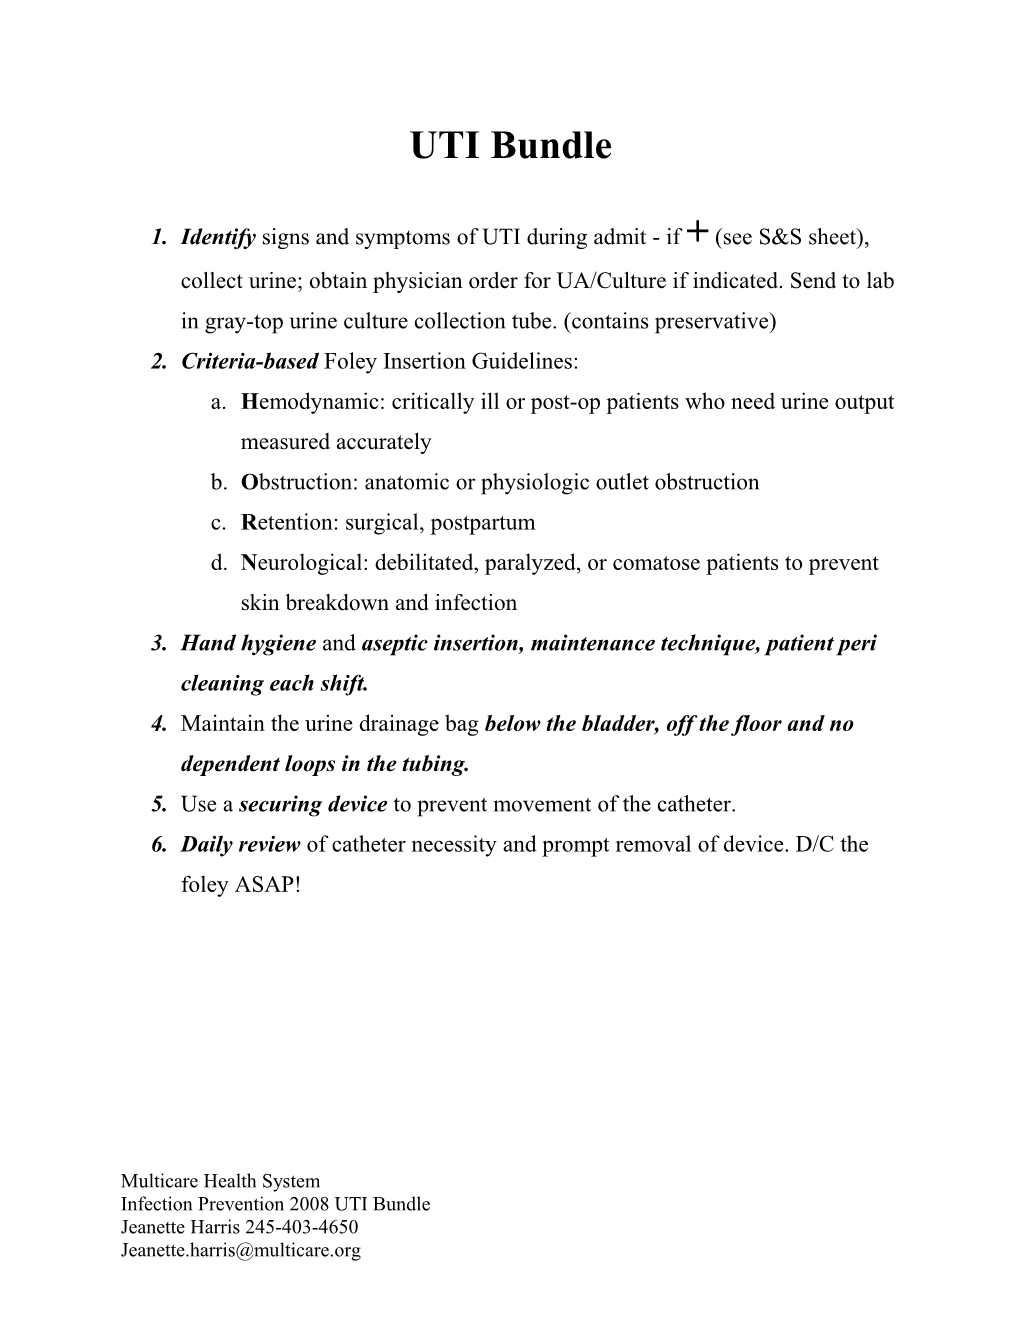 Criteria-Basedfoley Insertion Guidelines